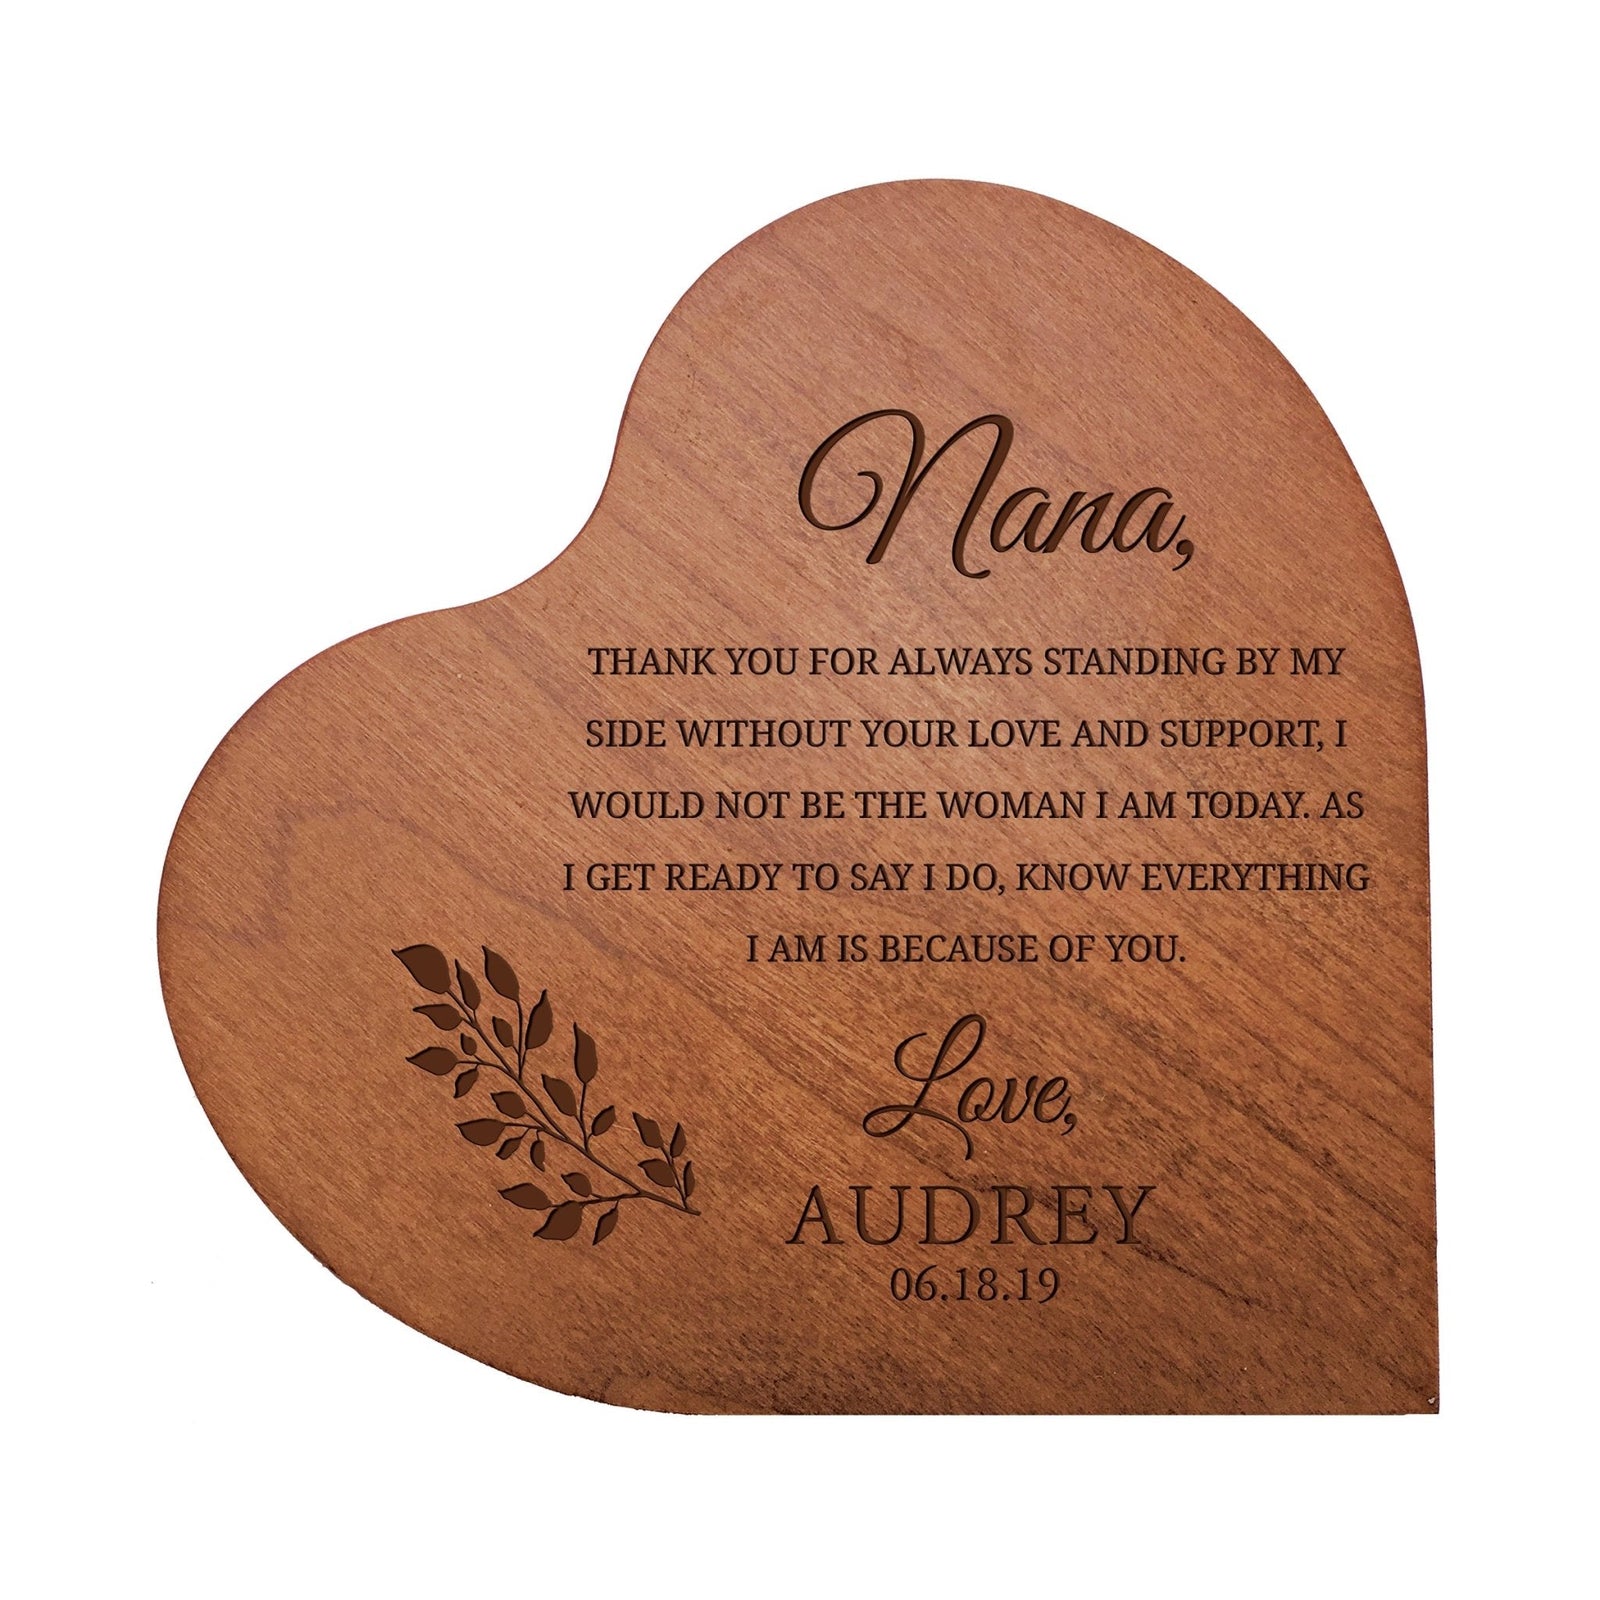 Personalized Modern Nana’s Love Solid Wood Heart Decoration With Inspirational Verse Keepsake Gift 5x5.25 - Nana Thank You For = Love And Support - LifeSong Milestones